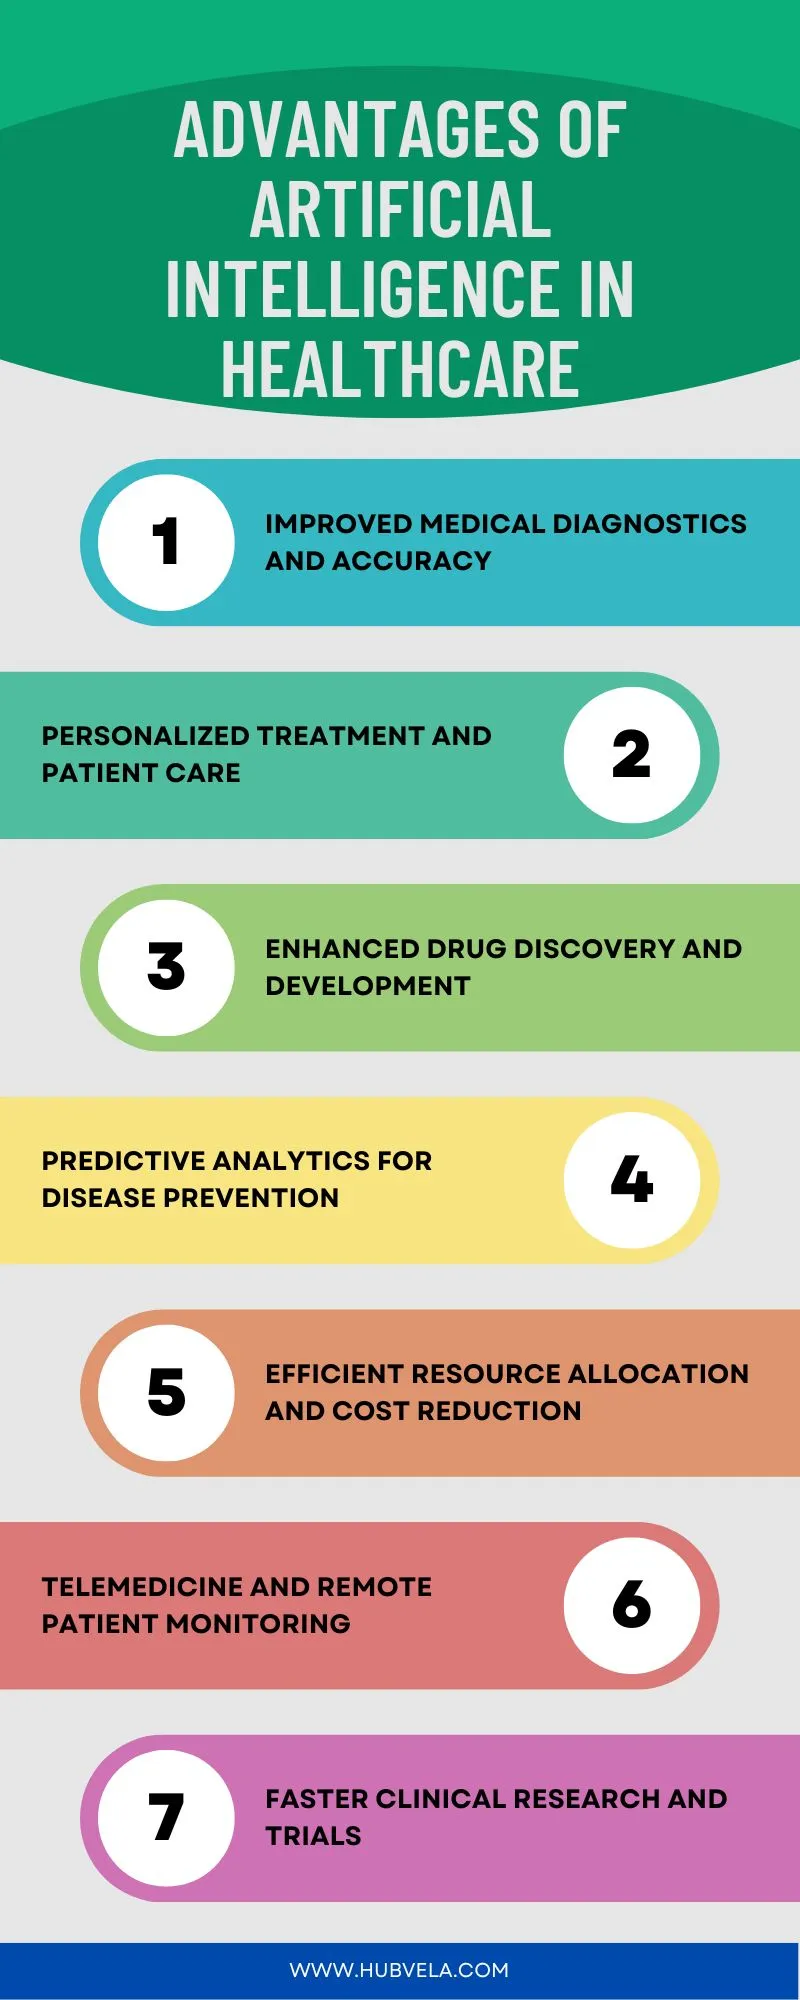 Advantages of Artificial Intelligence in Healthcare Infographic